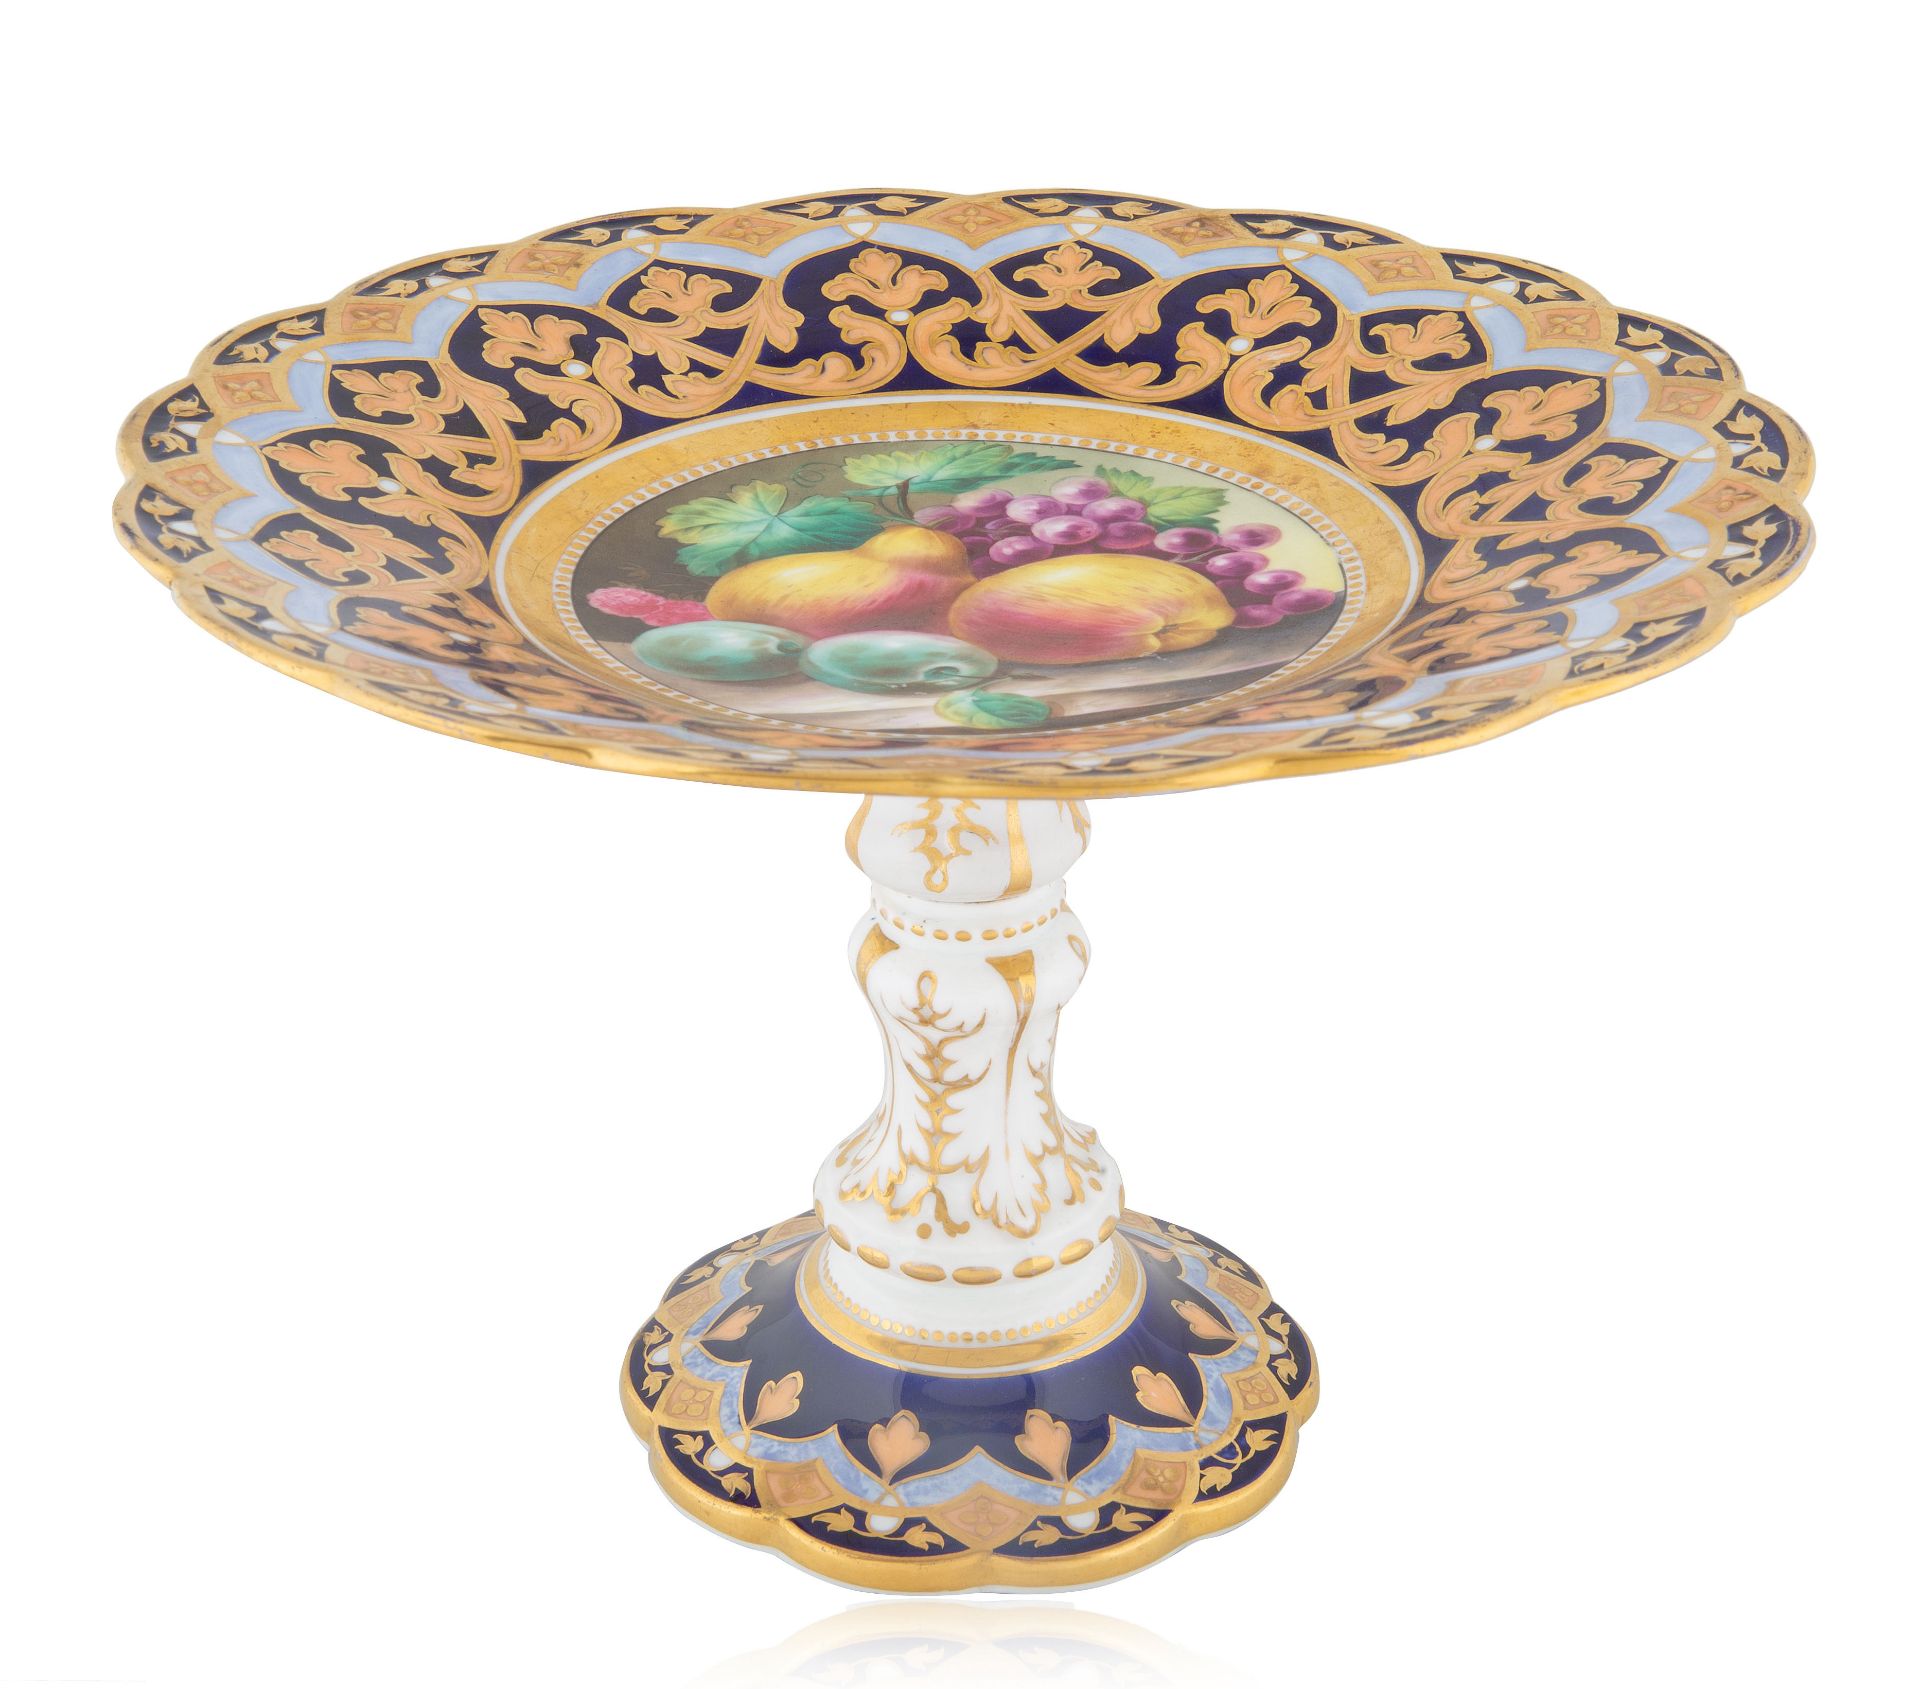 A BRITISH PORCELAIN CAKE STAND, 19TH CENTURY